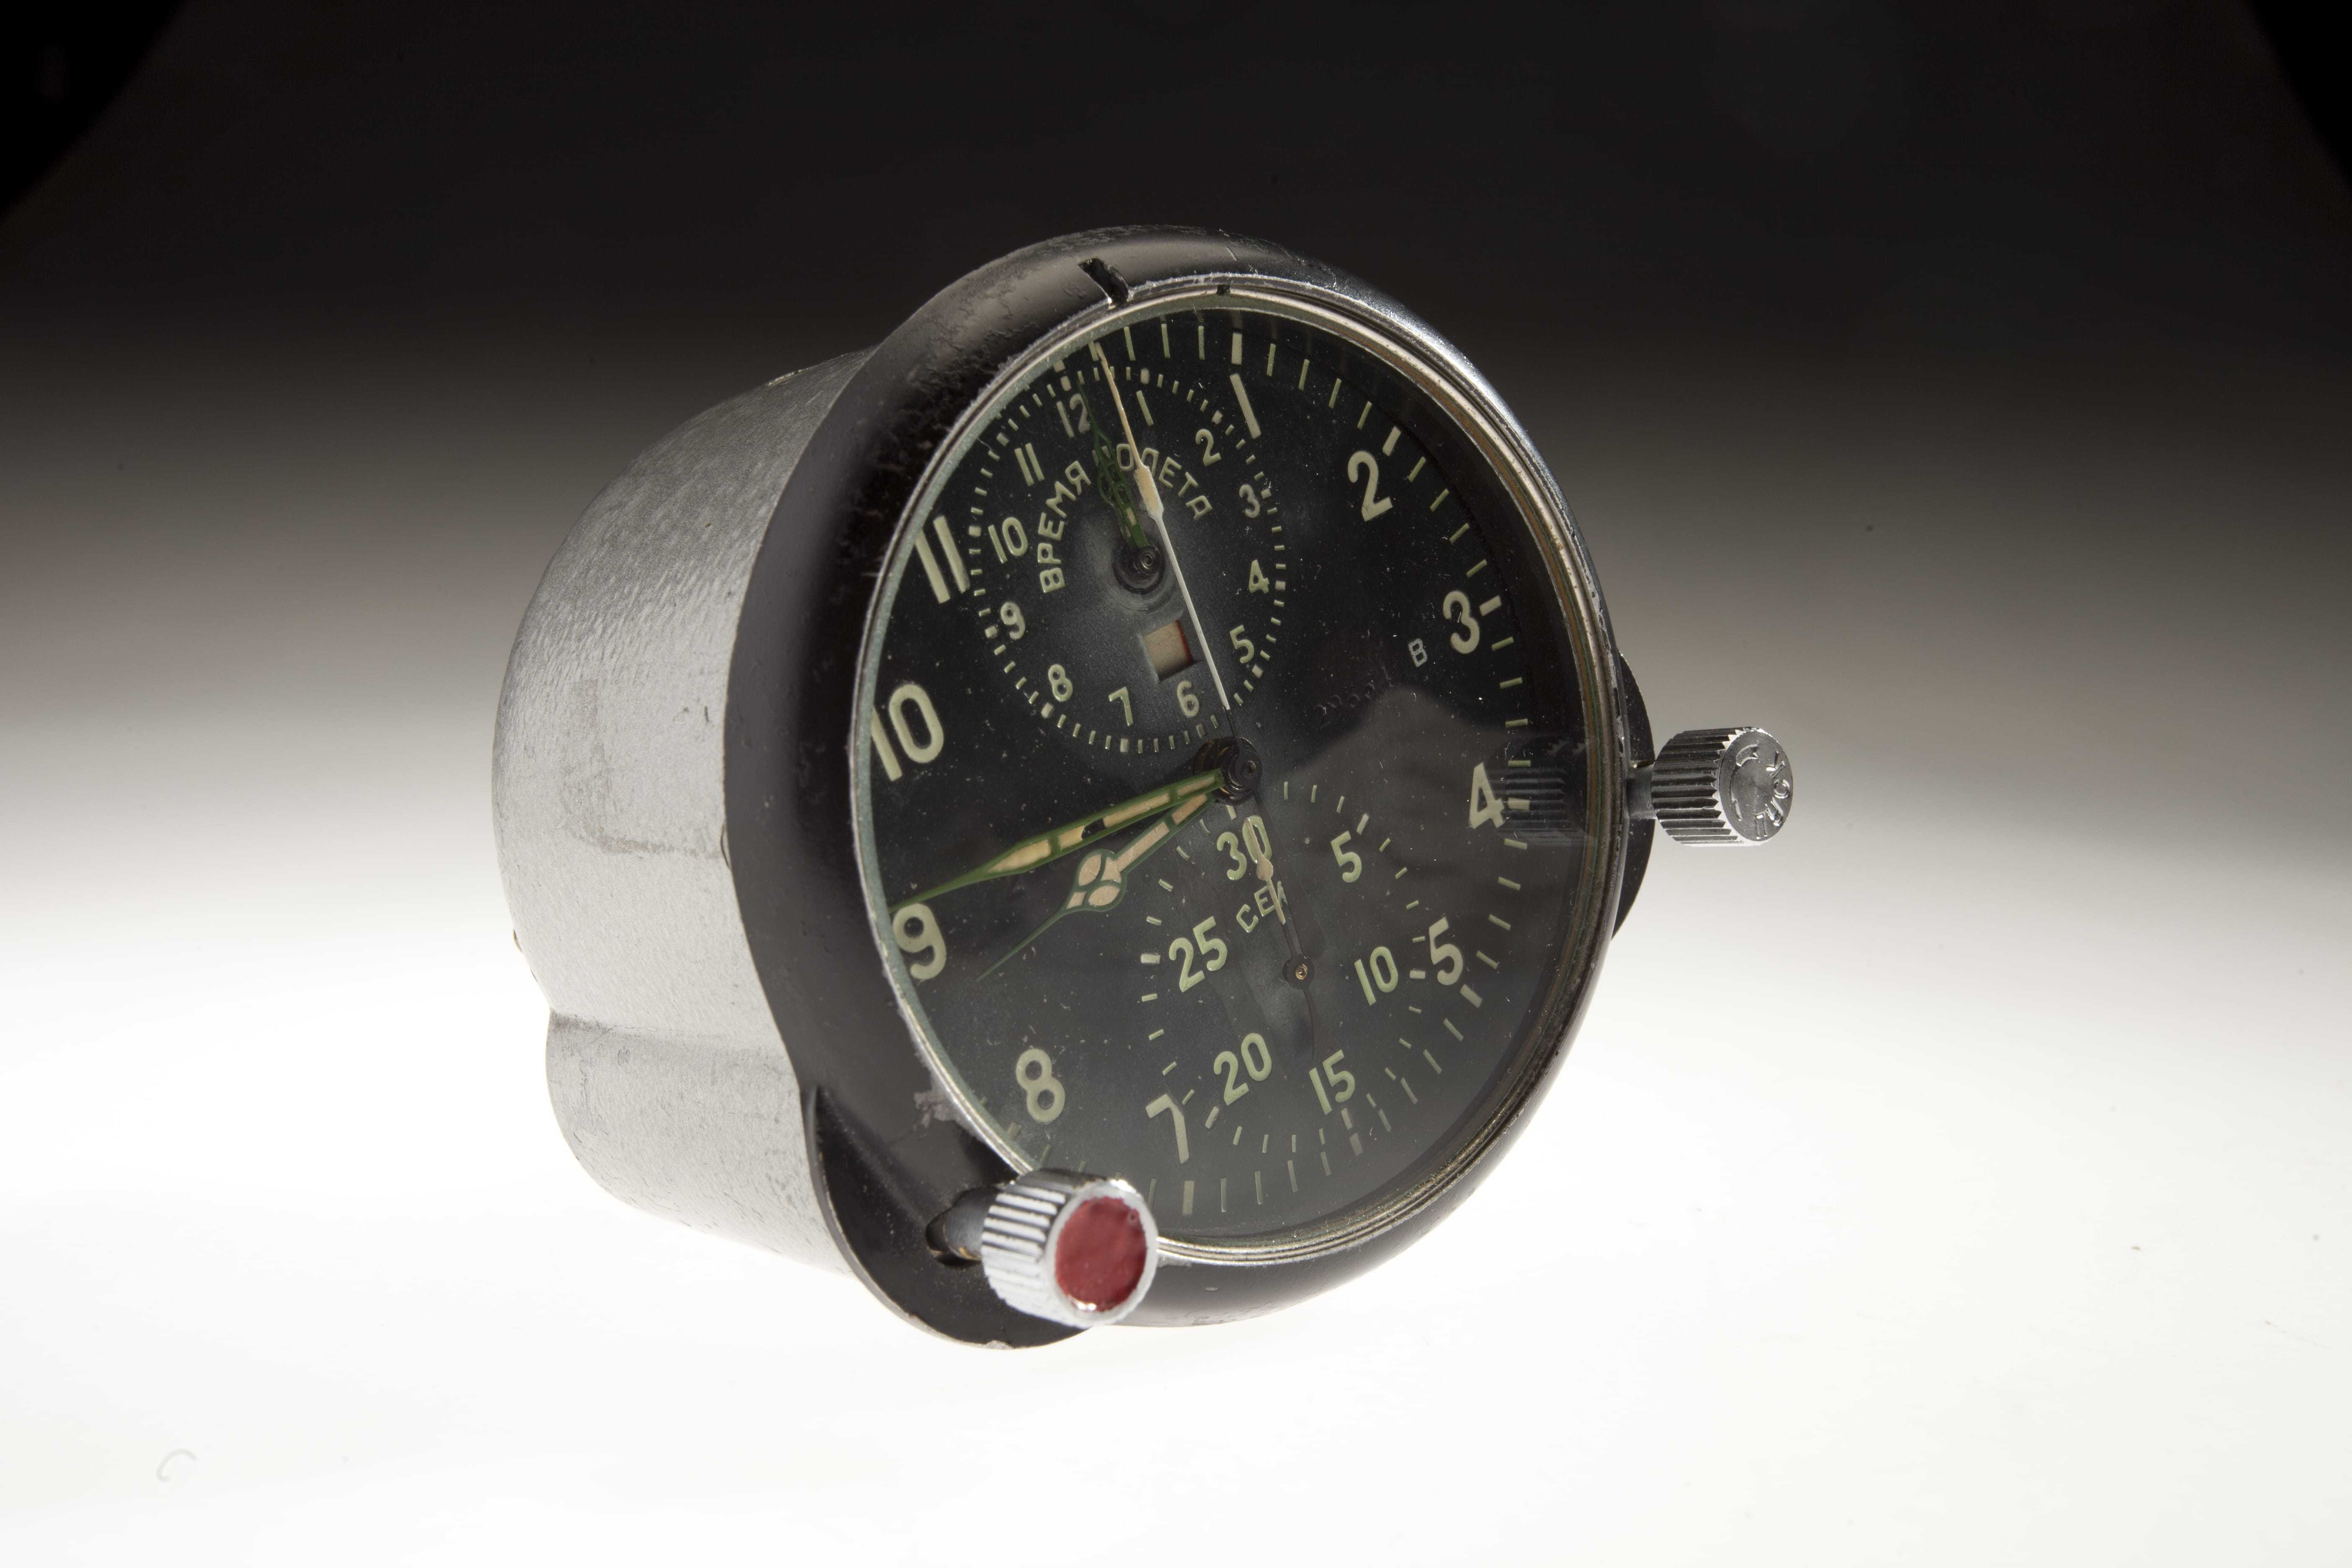 A clock from a Mi-17 helicopter, similar in appearance to a speedometer